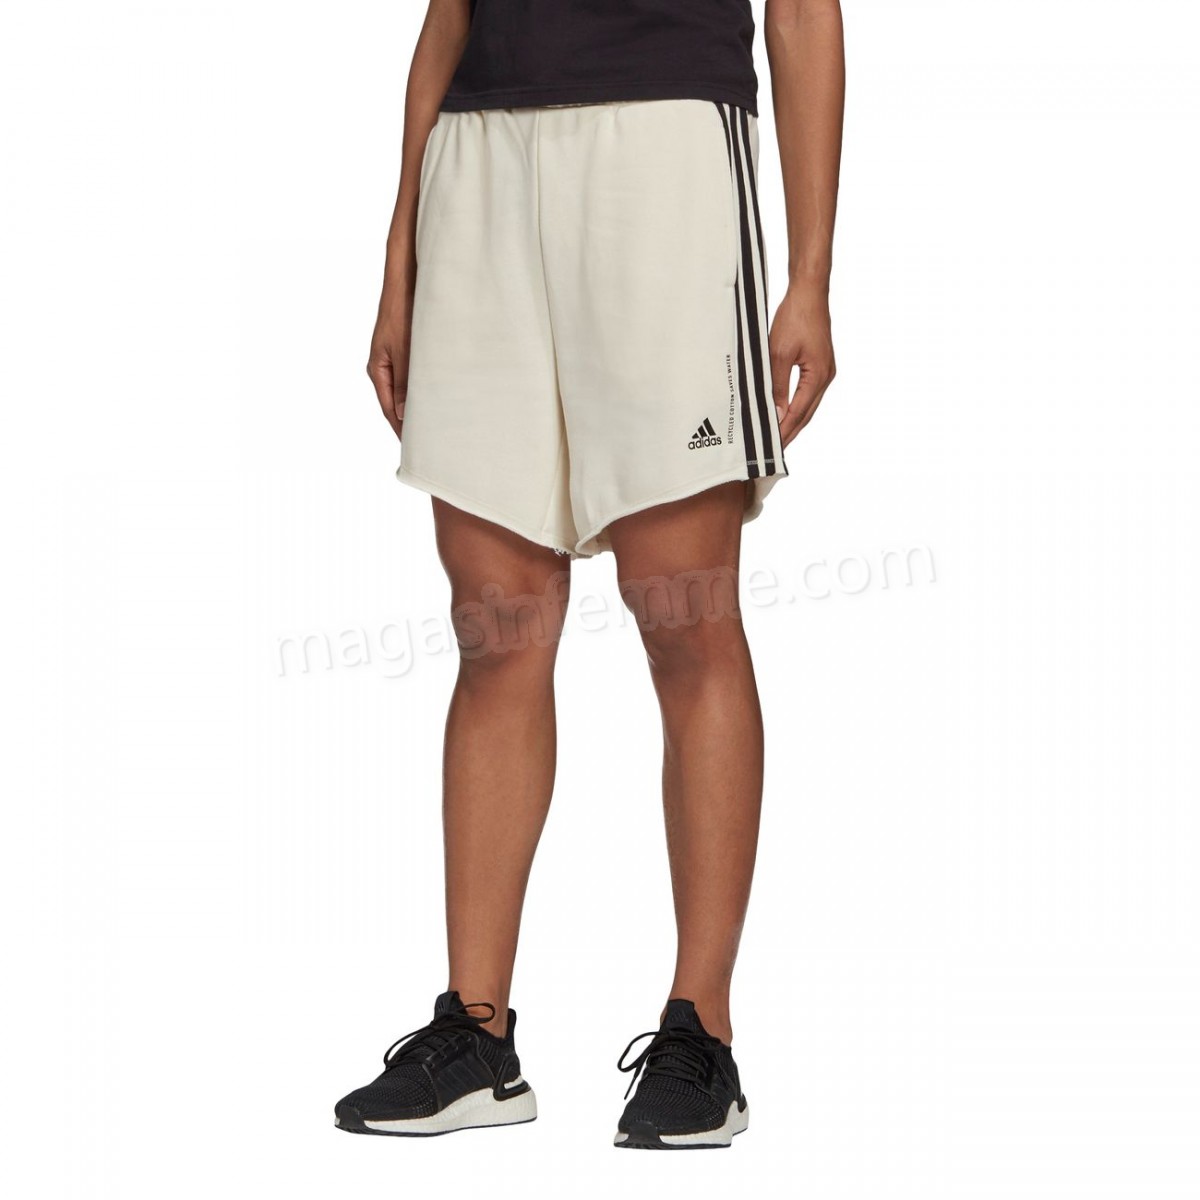 Adidas-Fitness femme ADIDAS Short femme adidas Must Haves Recycled Cotton en solde - -4